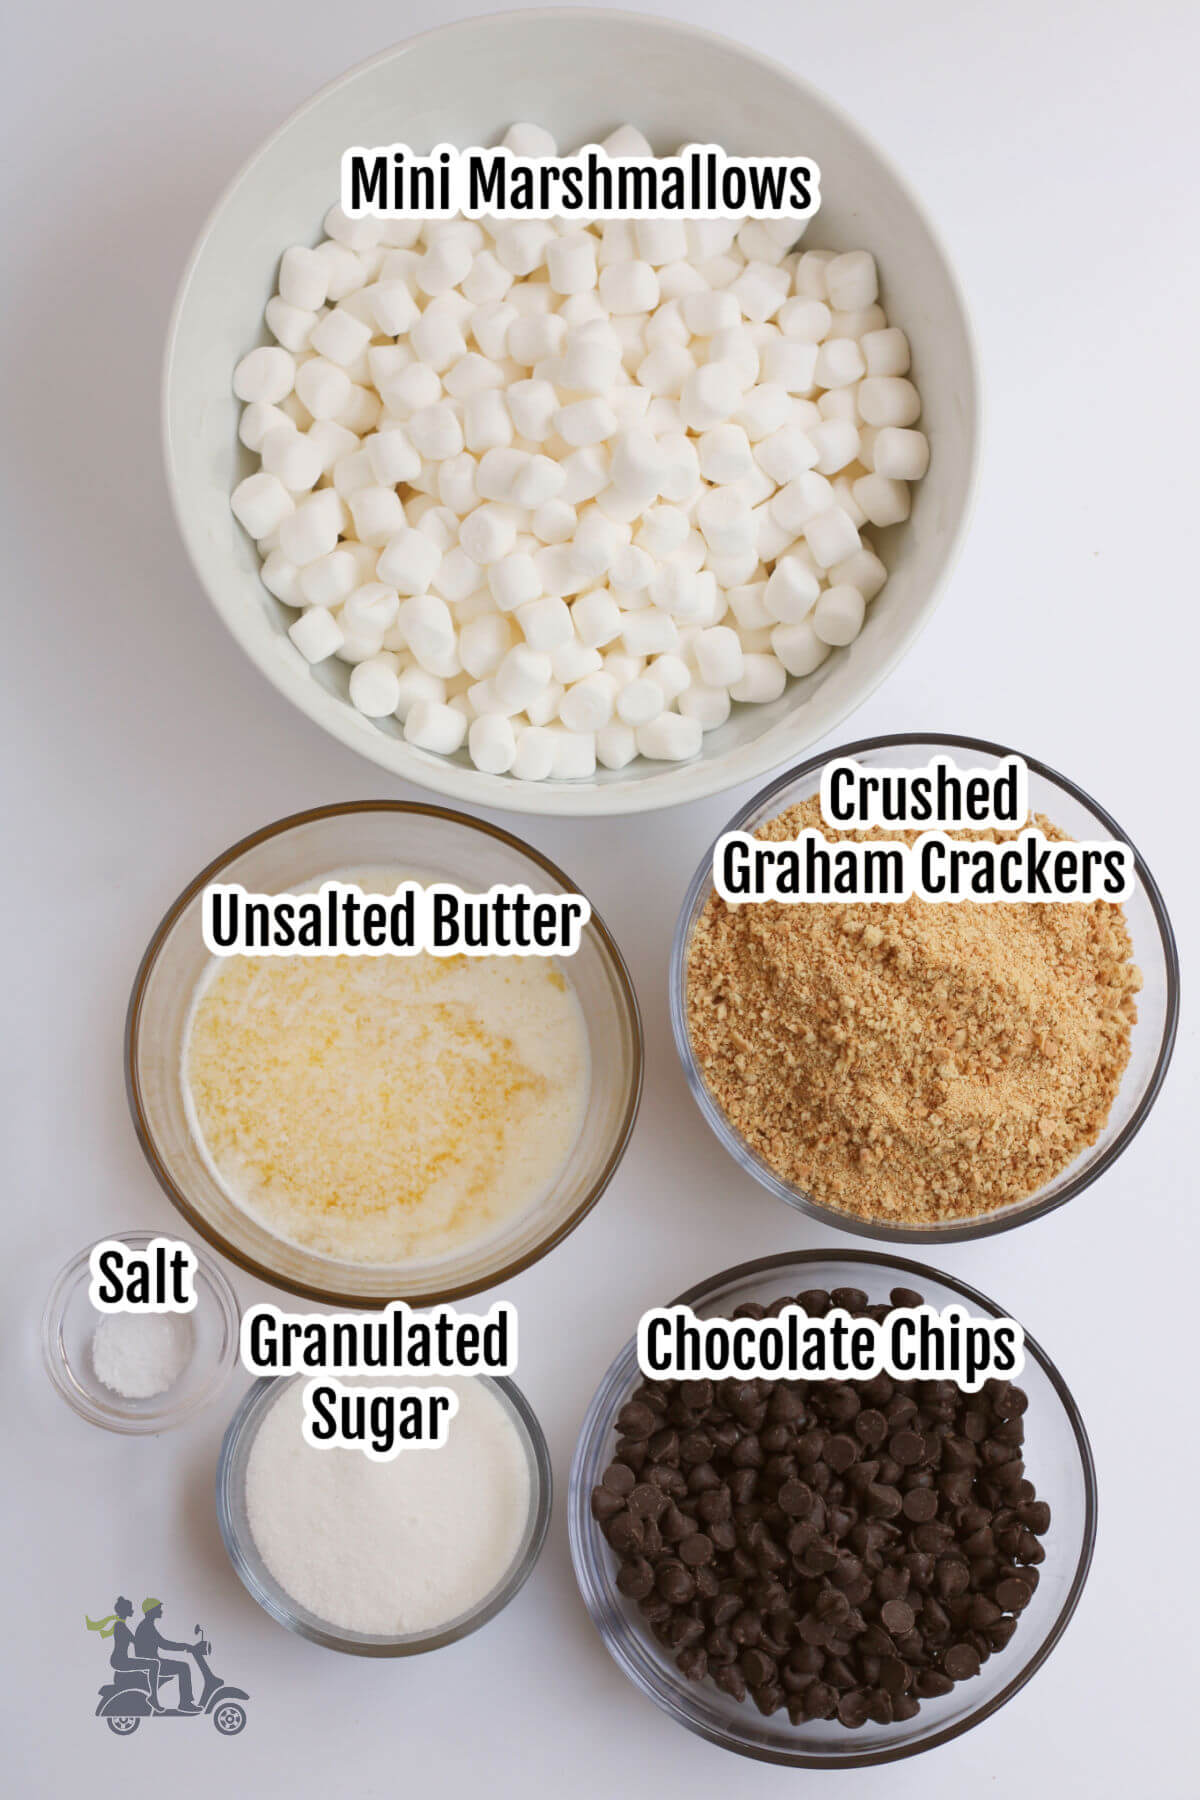 Image of the ingredients needed for S'mores bars with marshmallows and chocolate chips. 